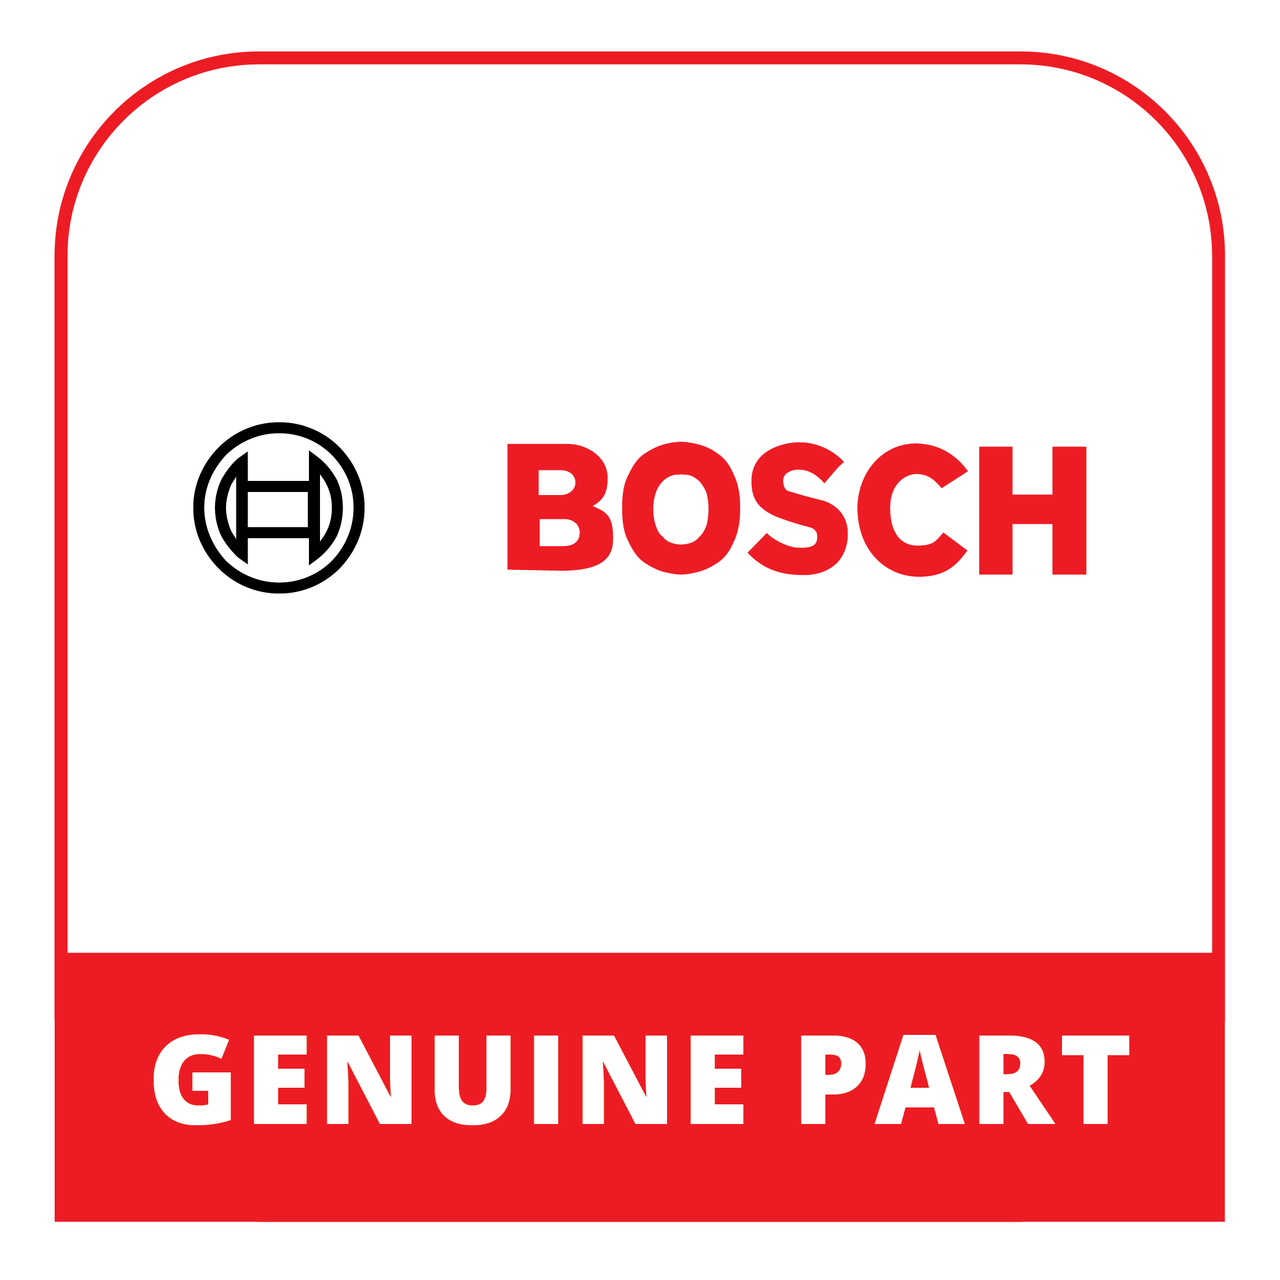 Bosch (Thermador) 12044246 - Rail-Pull Out - Genuine Bosch (Thermador) Part